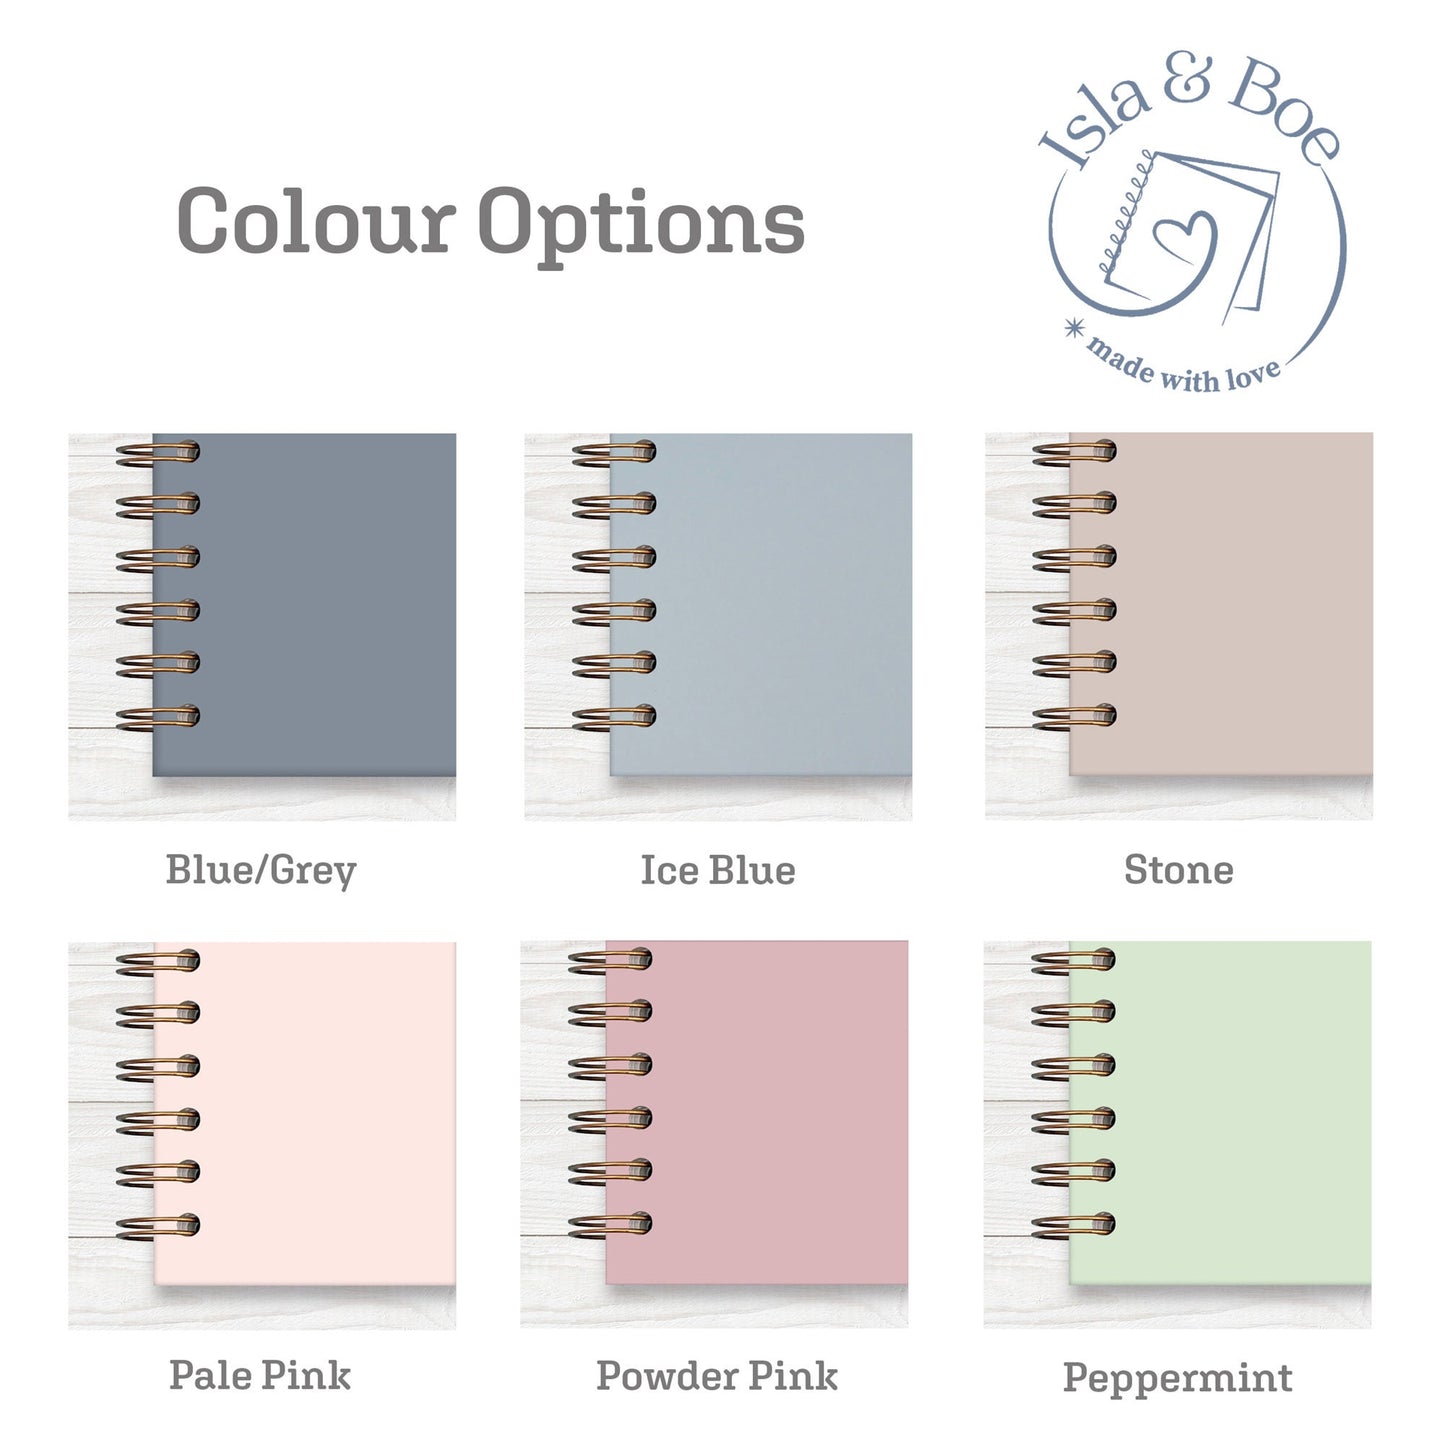 Memory Book colour swatch. They are Blue/Grey, Ice Blue, Stone, Pale Pink, Powder Pink and Peppermint